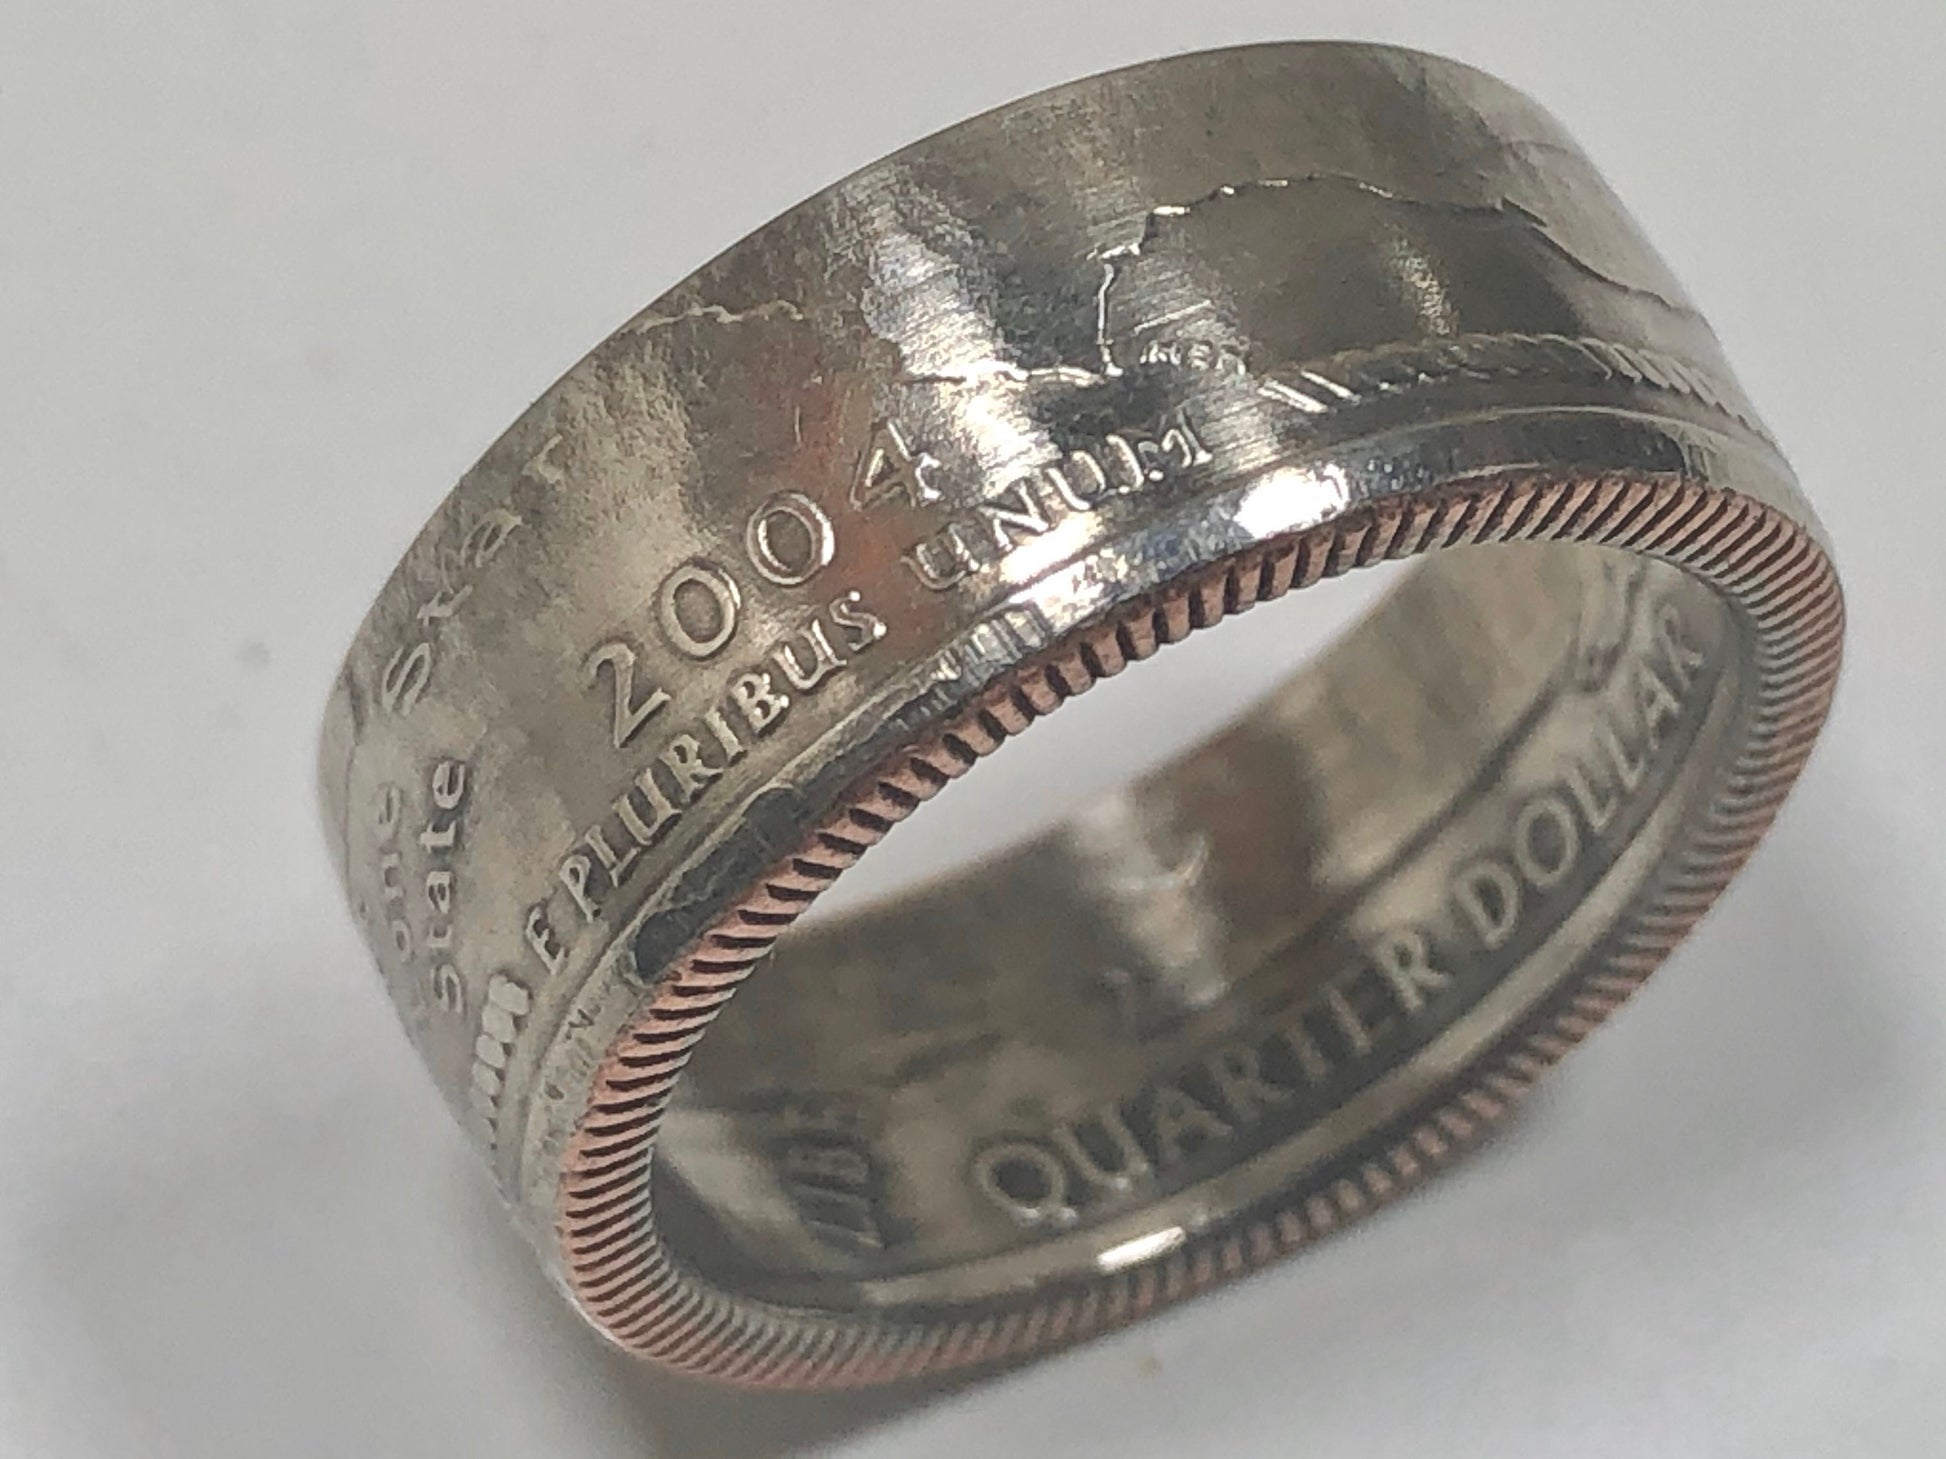 Texas Ring State Quarter Coin Ring Hand Made